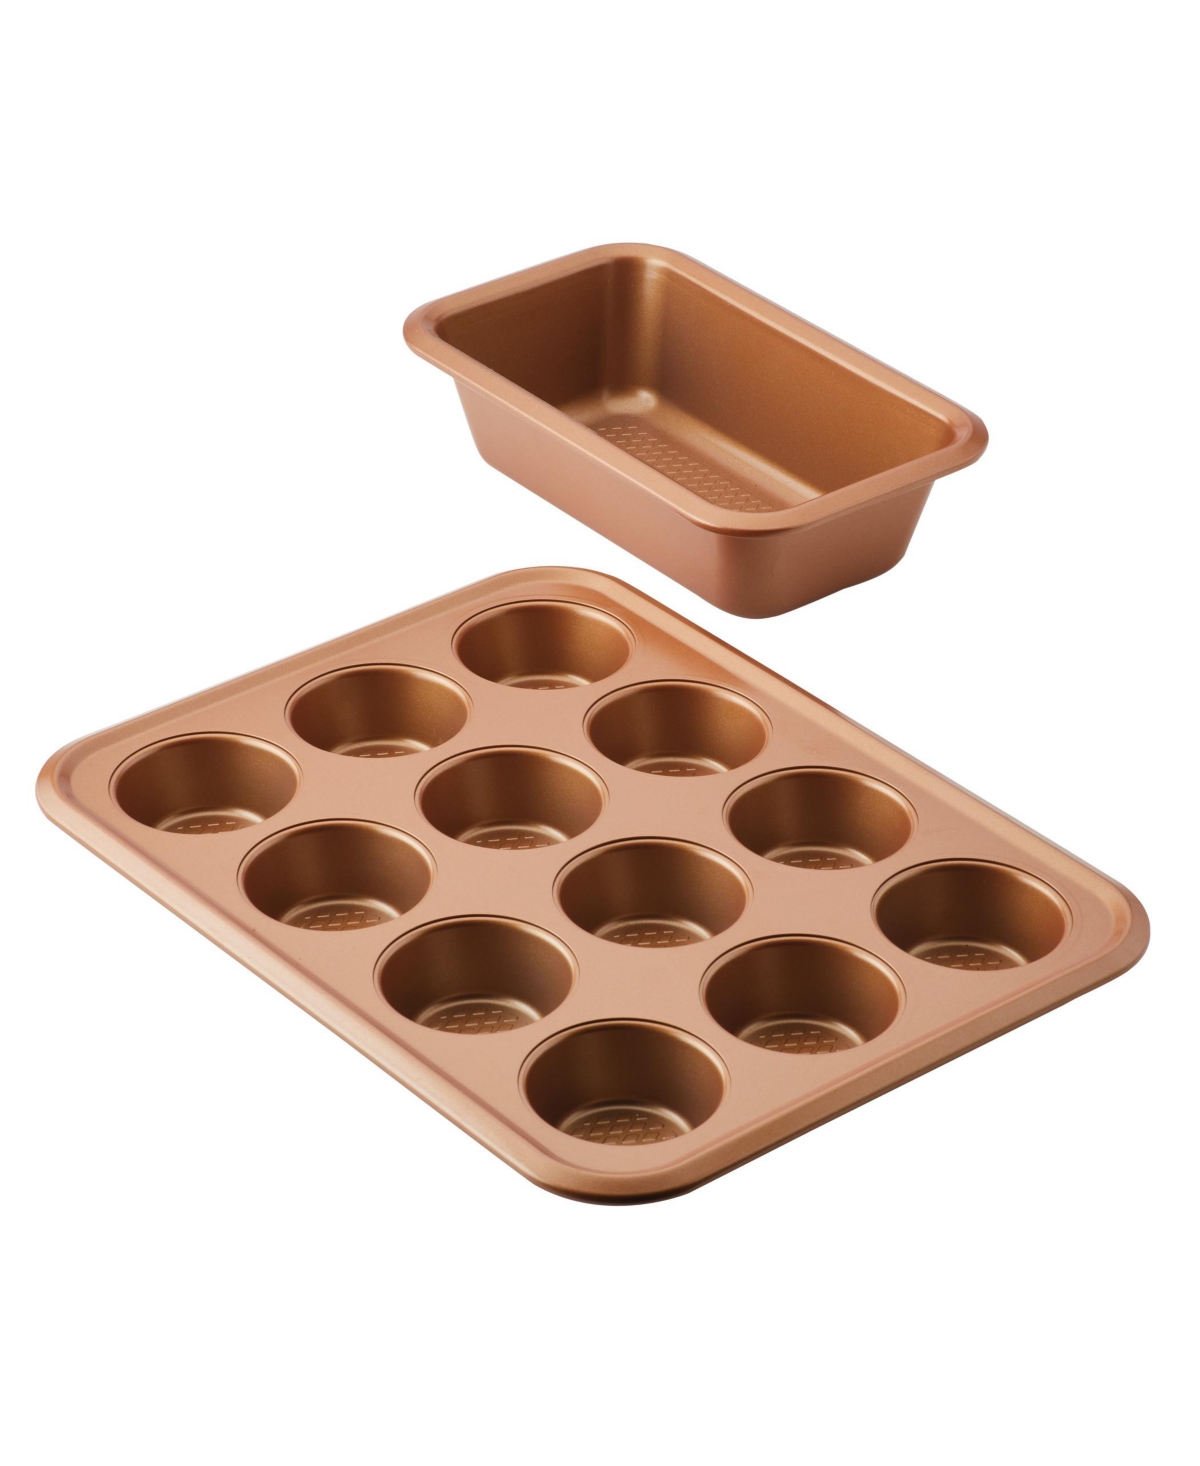 Ayesha Curry 9 x 5 Loaf Pan & 12 Cup Muffin Pan